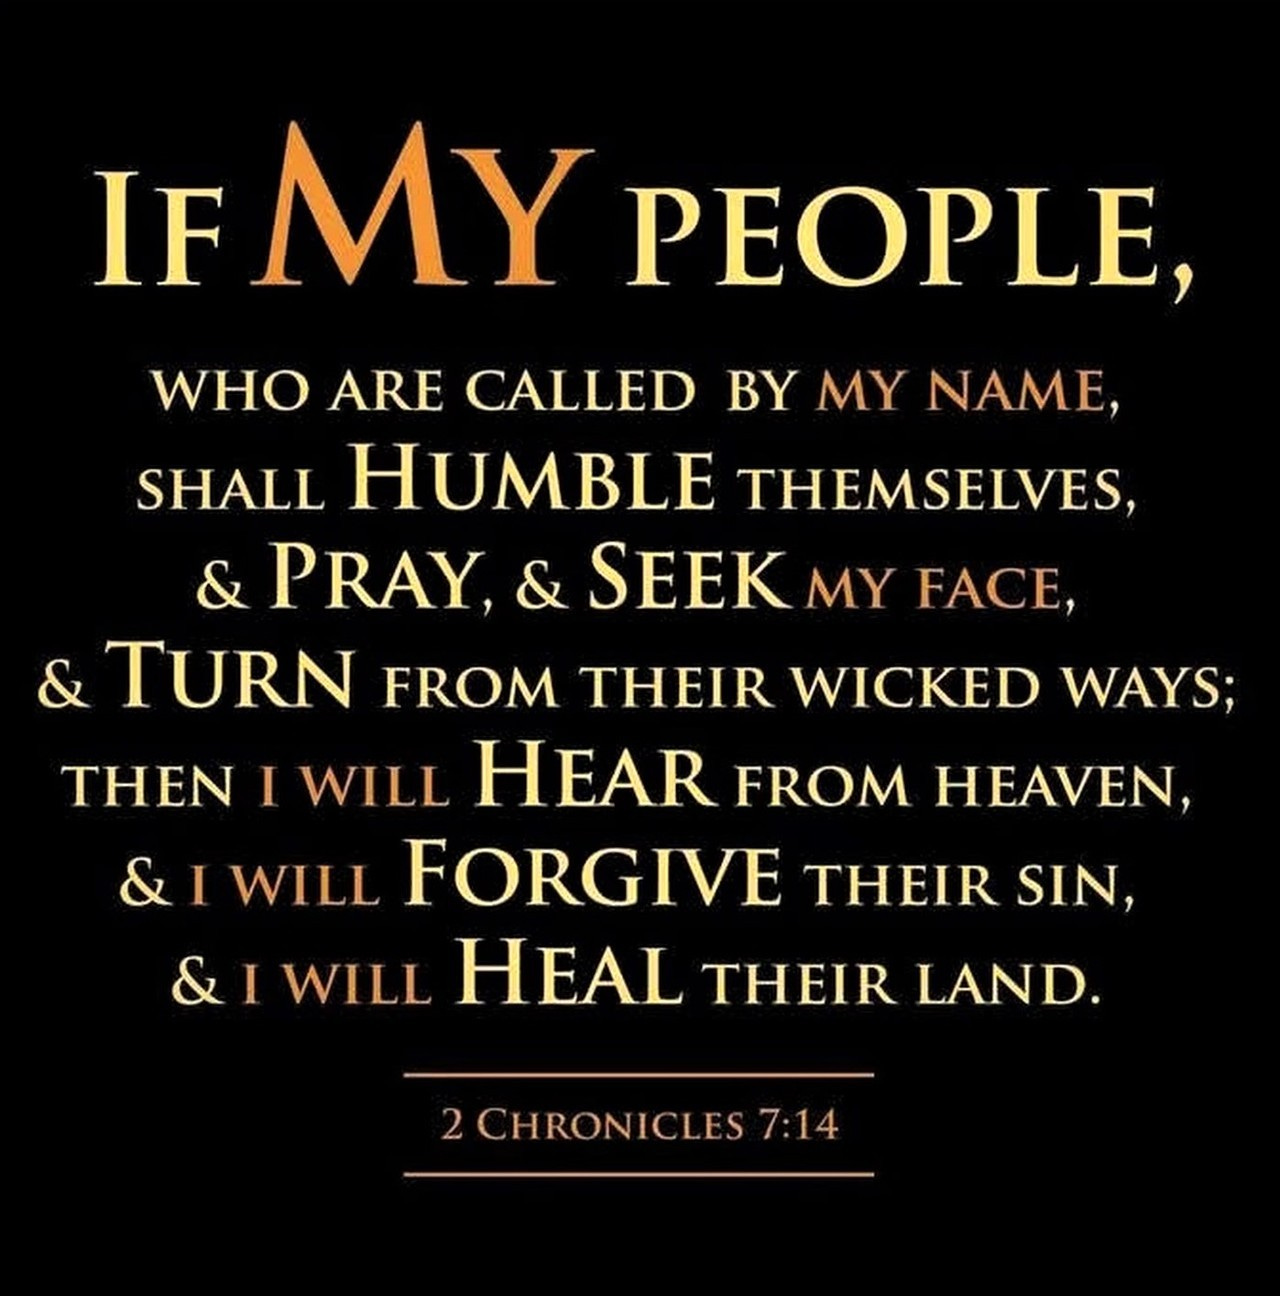 The Living... — 2 Chronicles 7:14 (KJV) - If My people, which are...